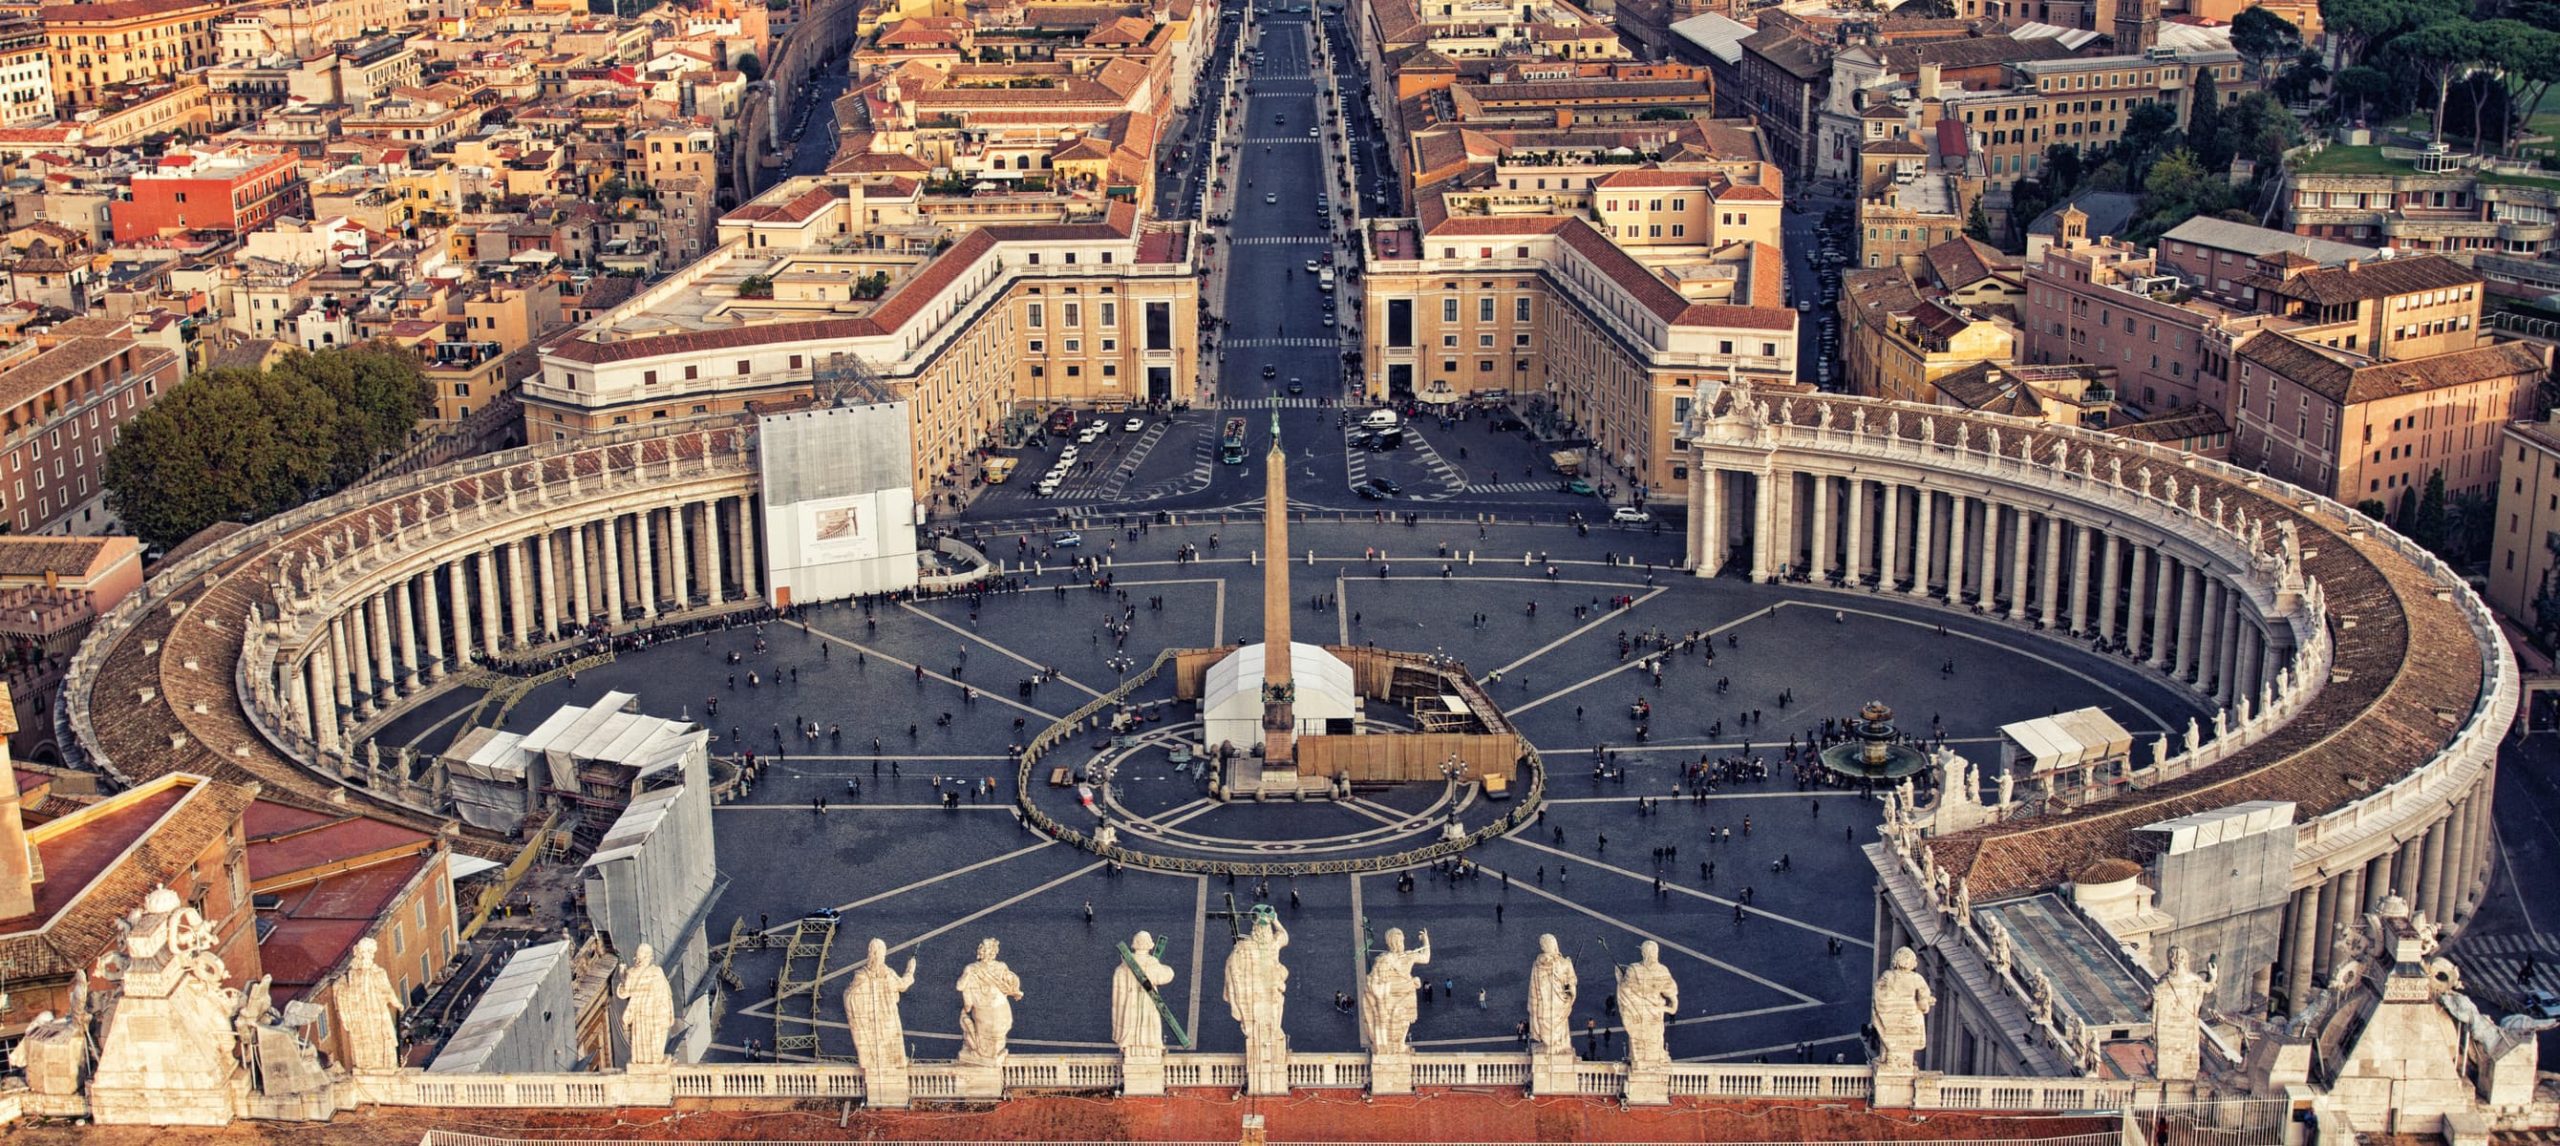 Vatican City seen from above